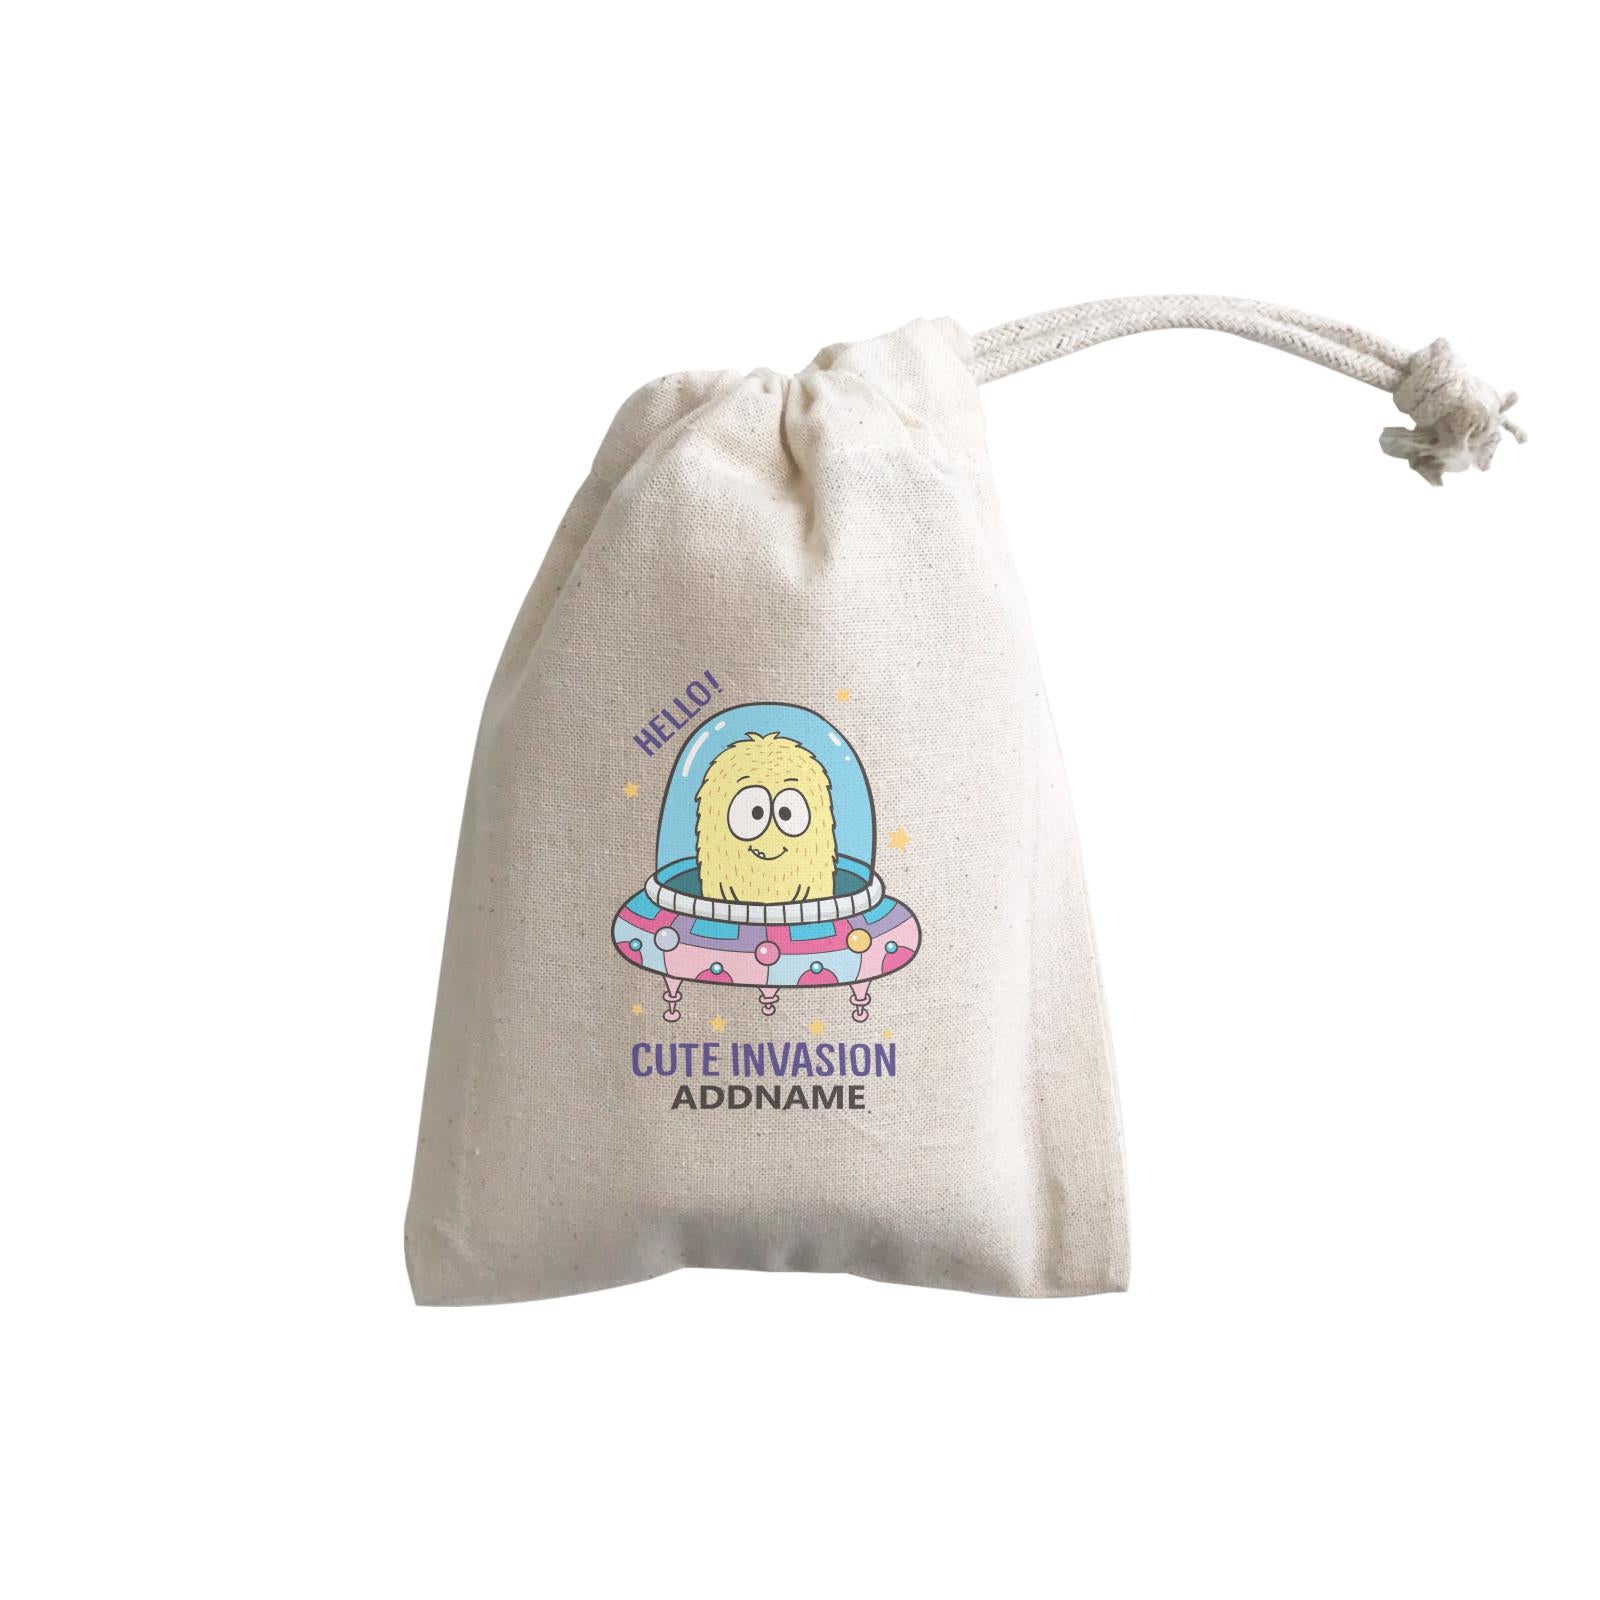 Cool Cute Monster Hello Cute Invasion Monster Addname GP Gift Pouch